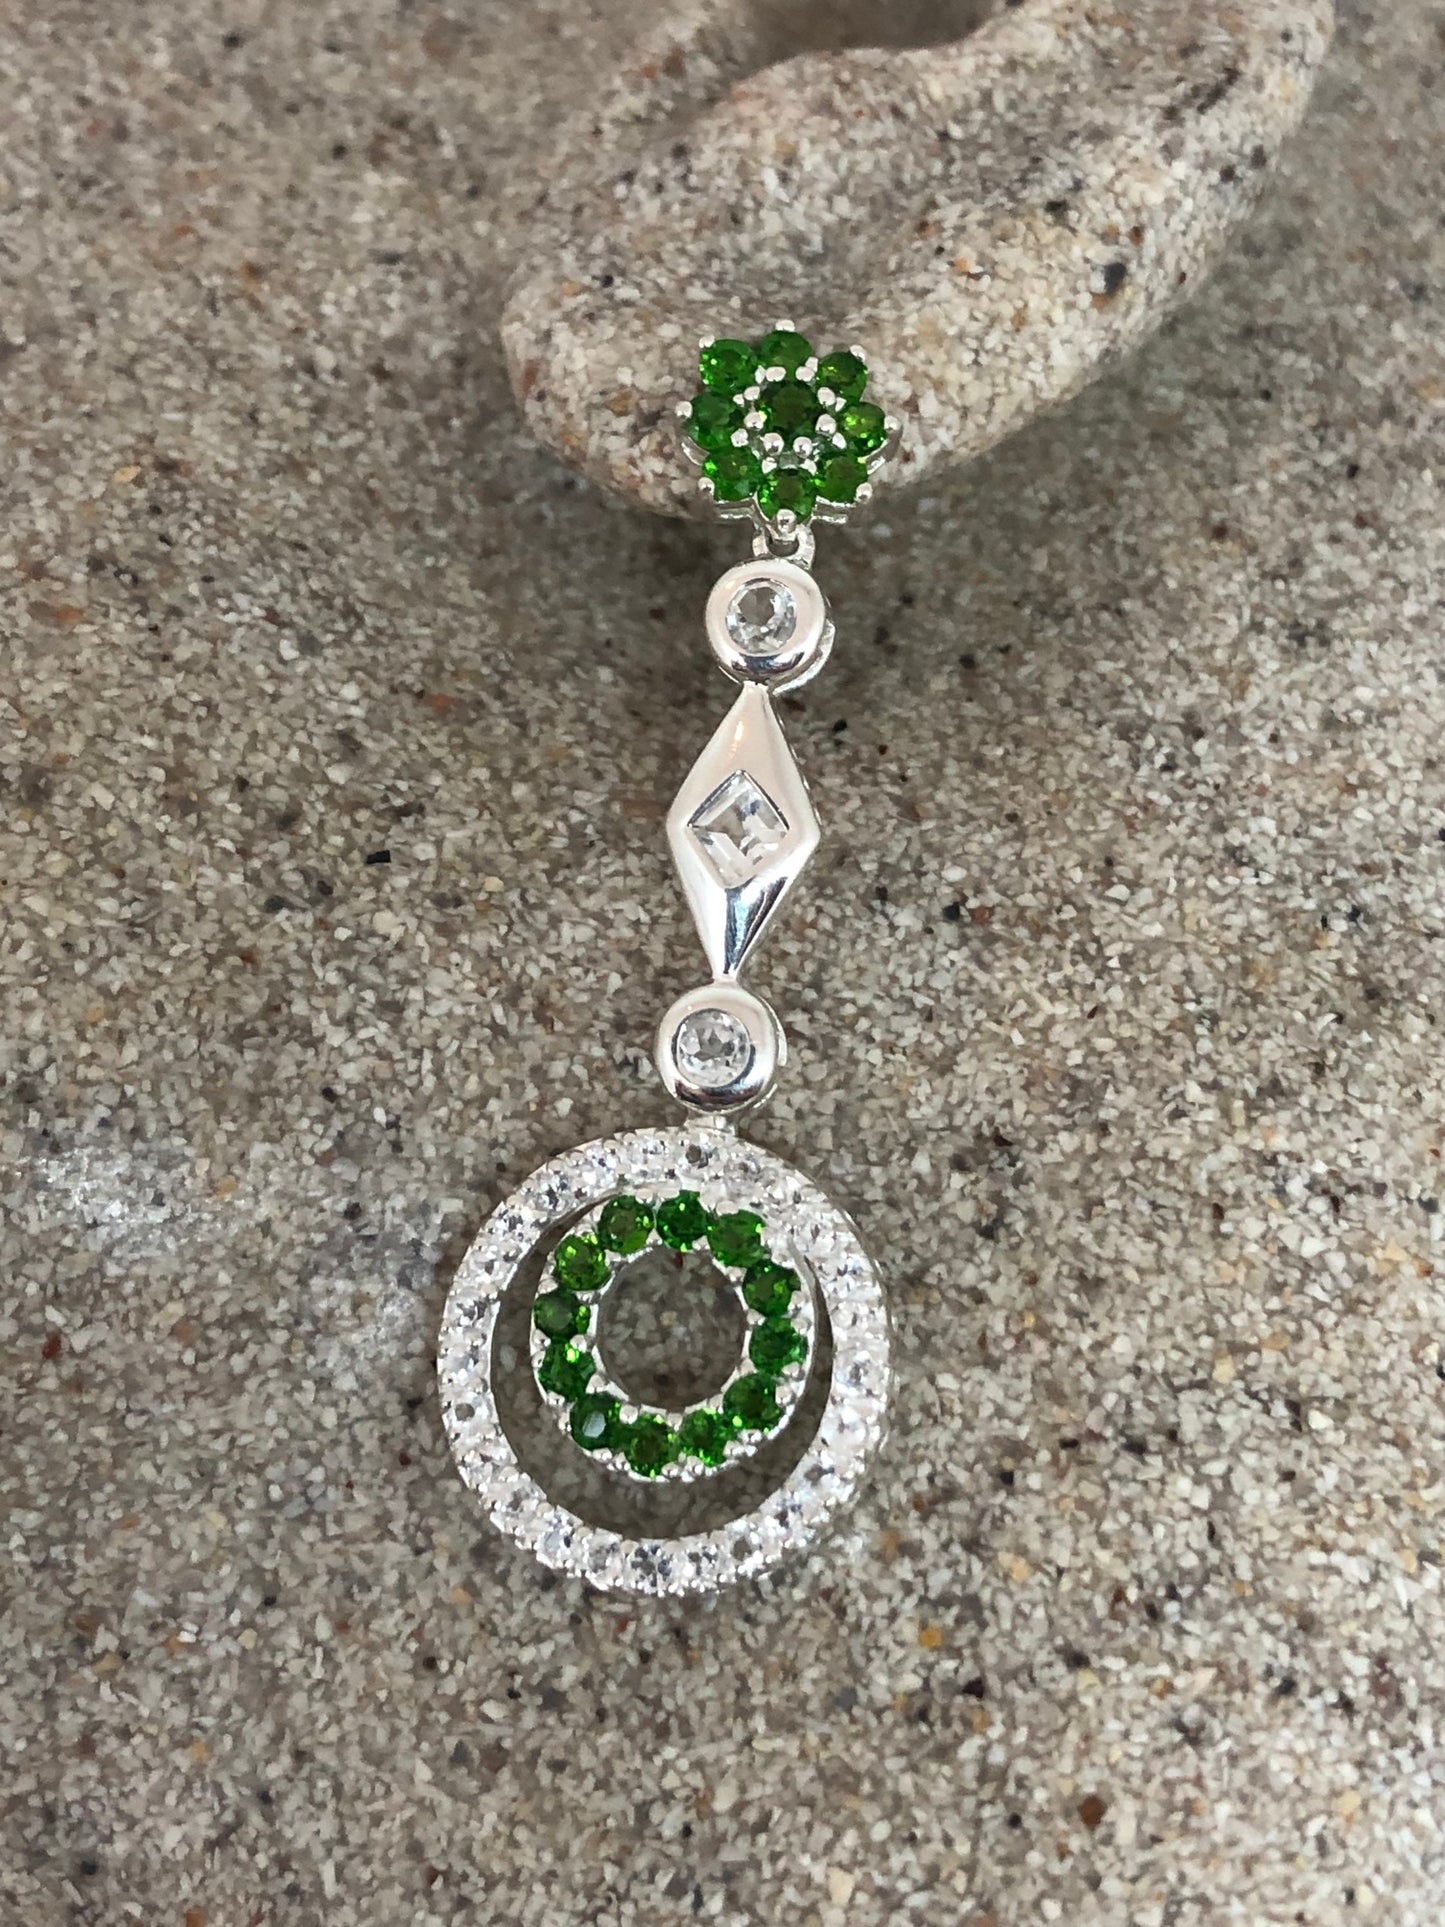 Vintage 925 Sterling Silver Chrome Diopside White Sapphire Chandelier Earrings